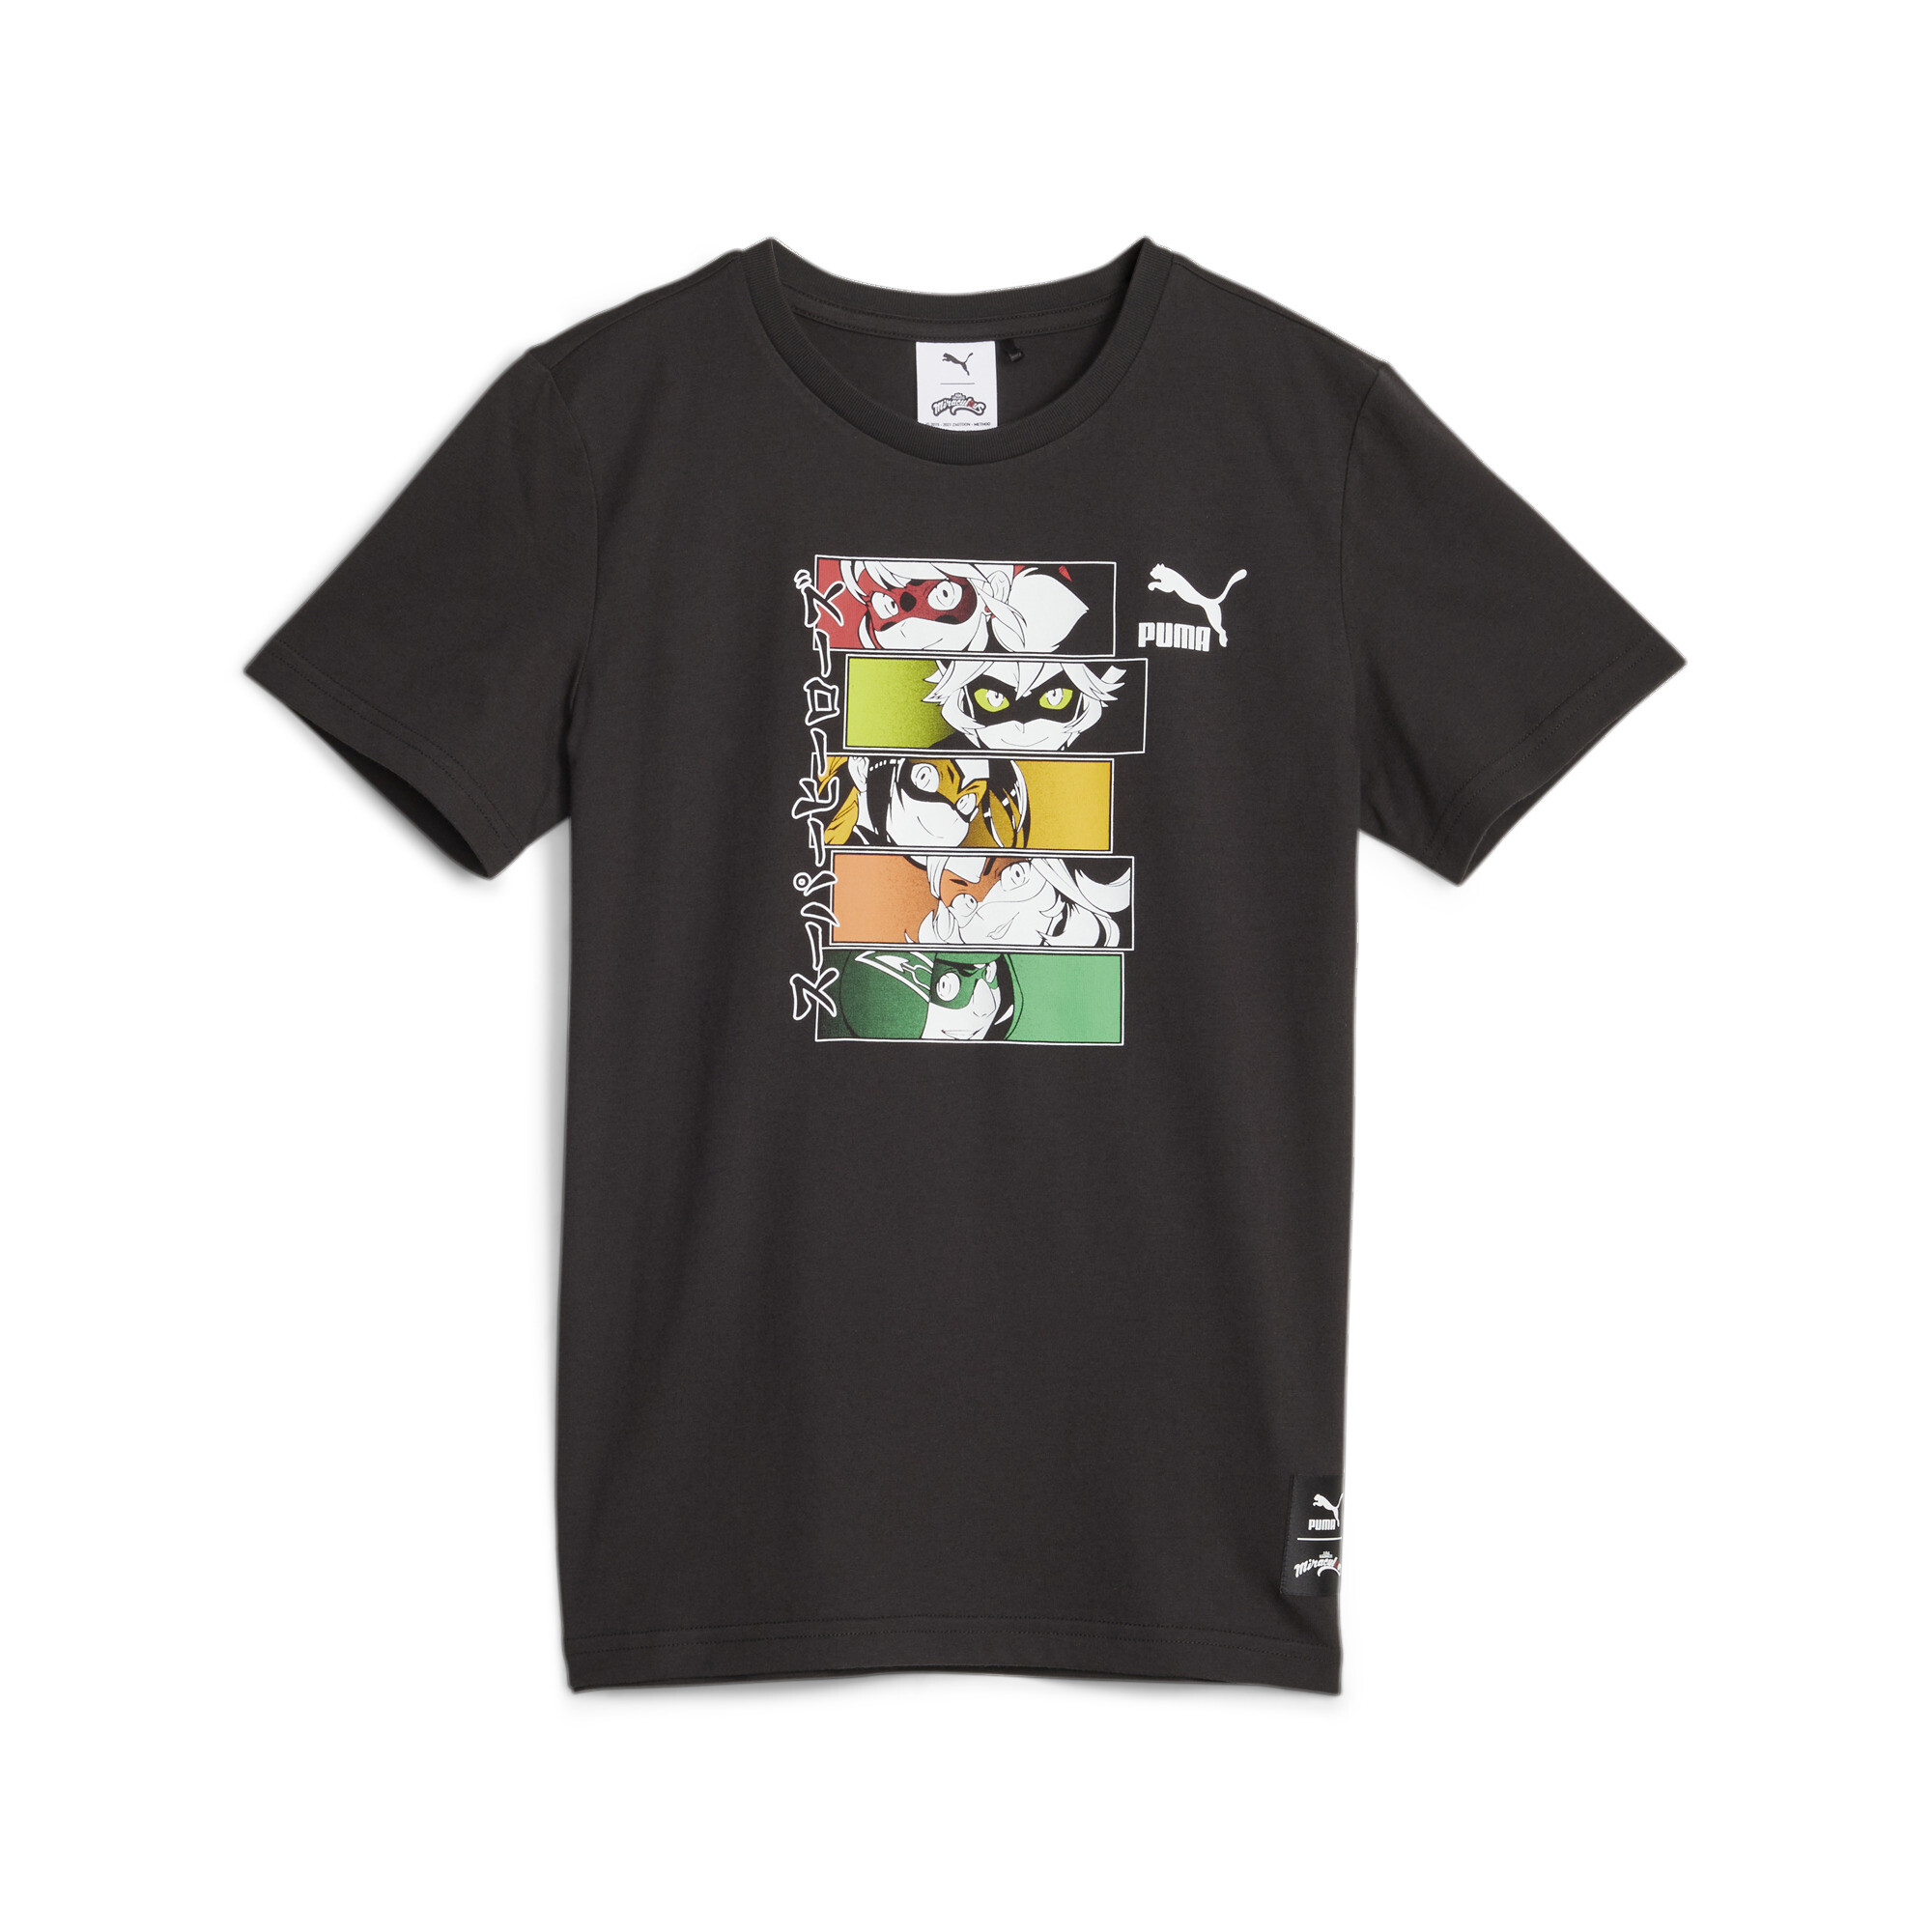 PUMA X MIRACULOUS T-Shirt In Black, Size 9-10 Youth